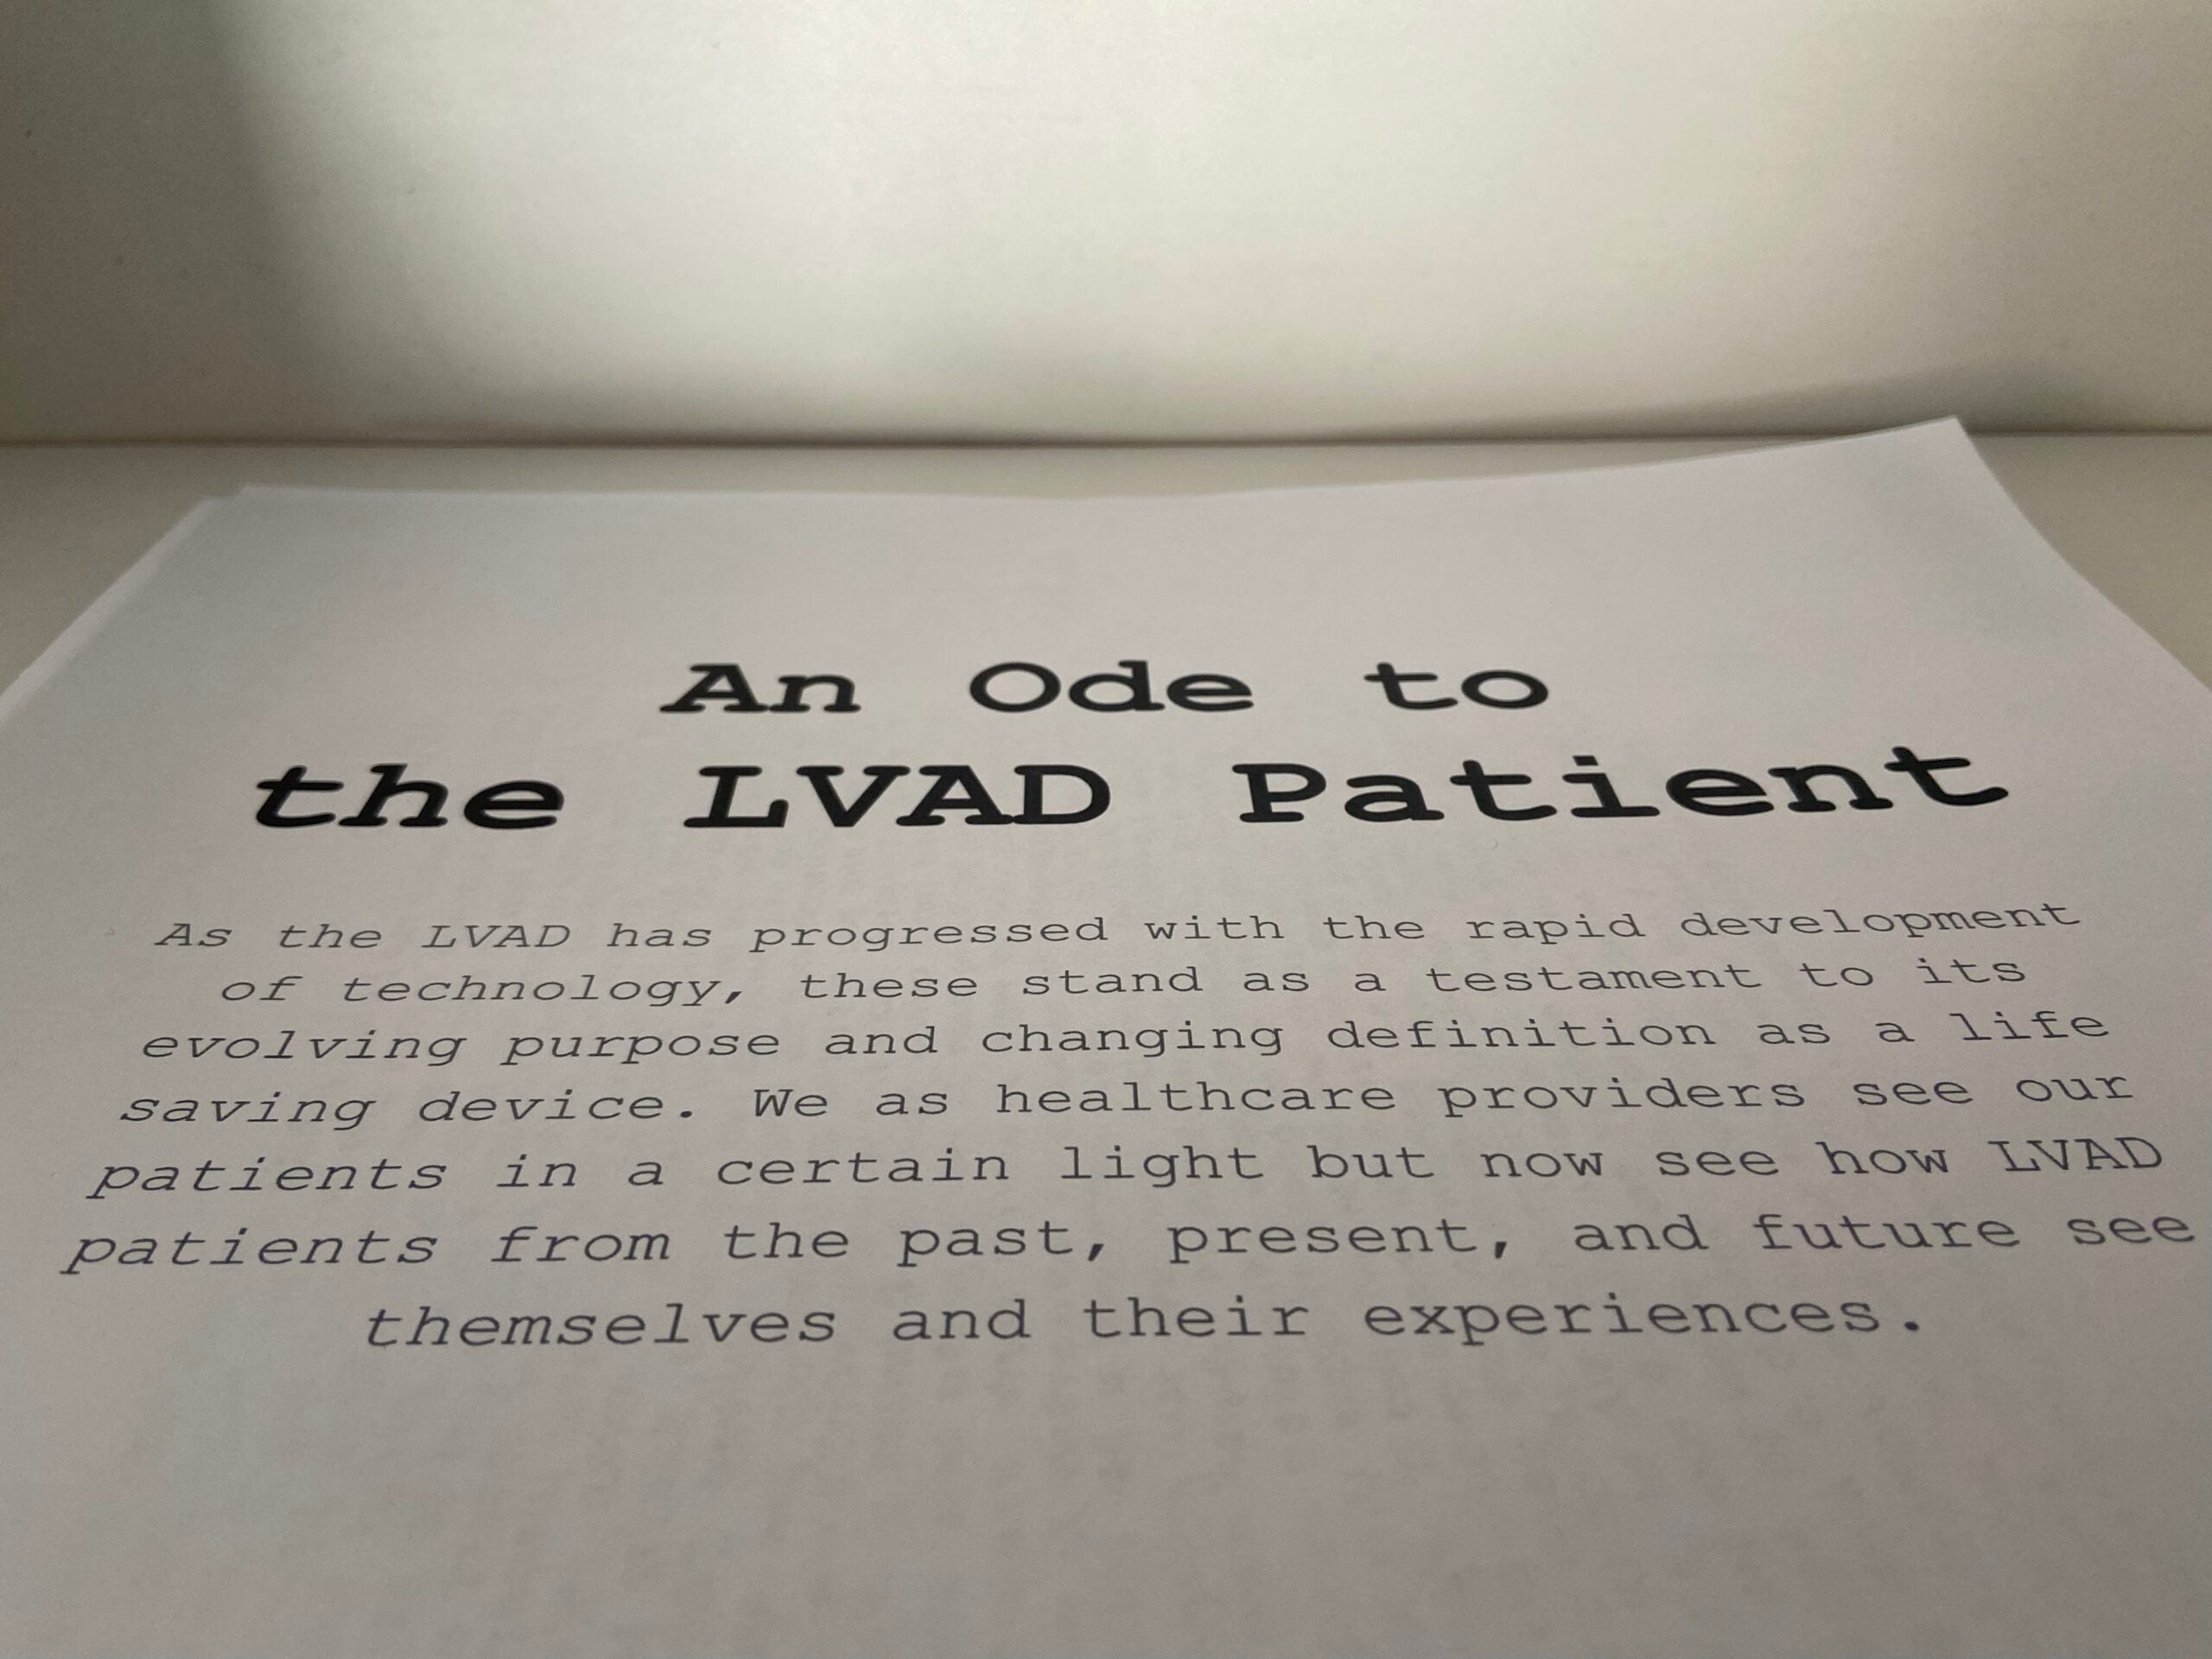 Text: An Ode to the LVAD Patient: As the LVAD has progressed with the rapid development of technology, these stand as a testament to its evolving purpose and changing definition as a life saving device. We as healthcare providers see our patients in a certain light but now see how LVAD patients fron the past, present, and future see themselves and their experiences.